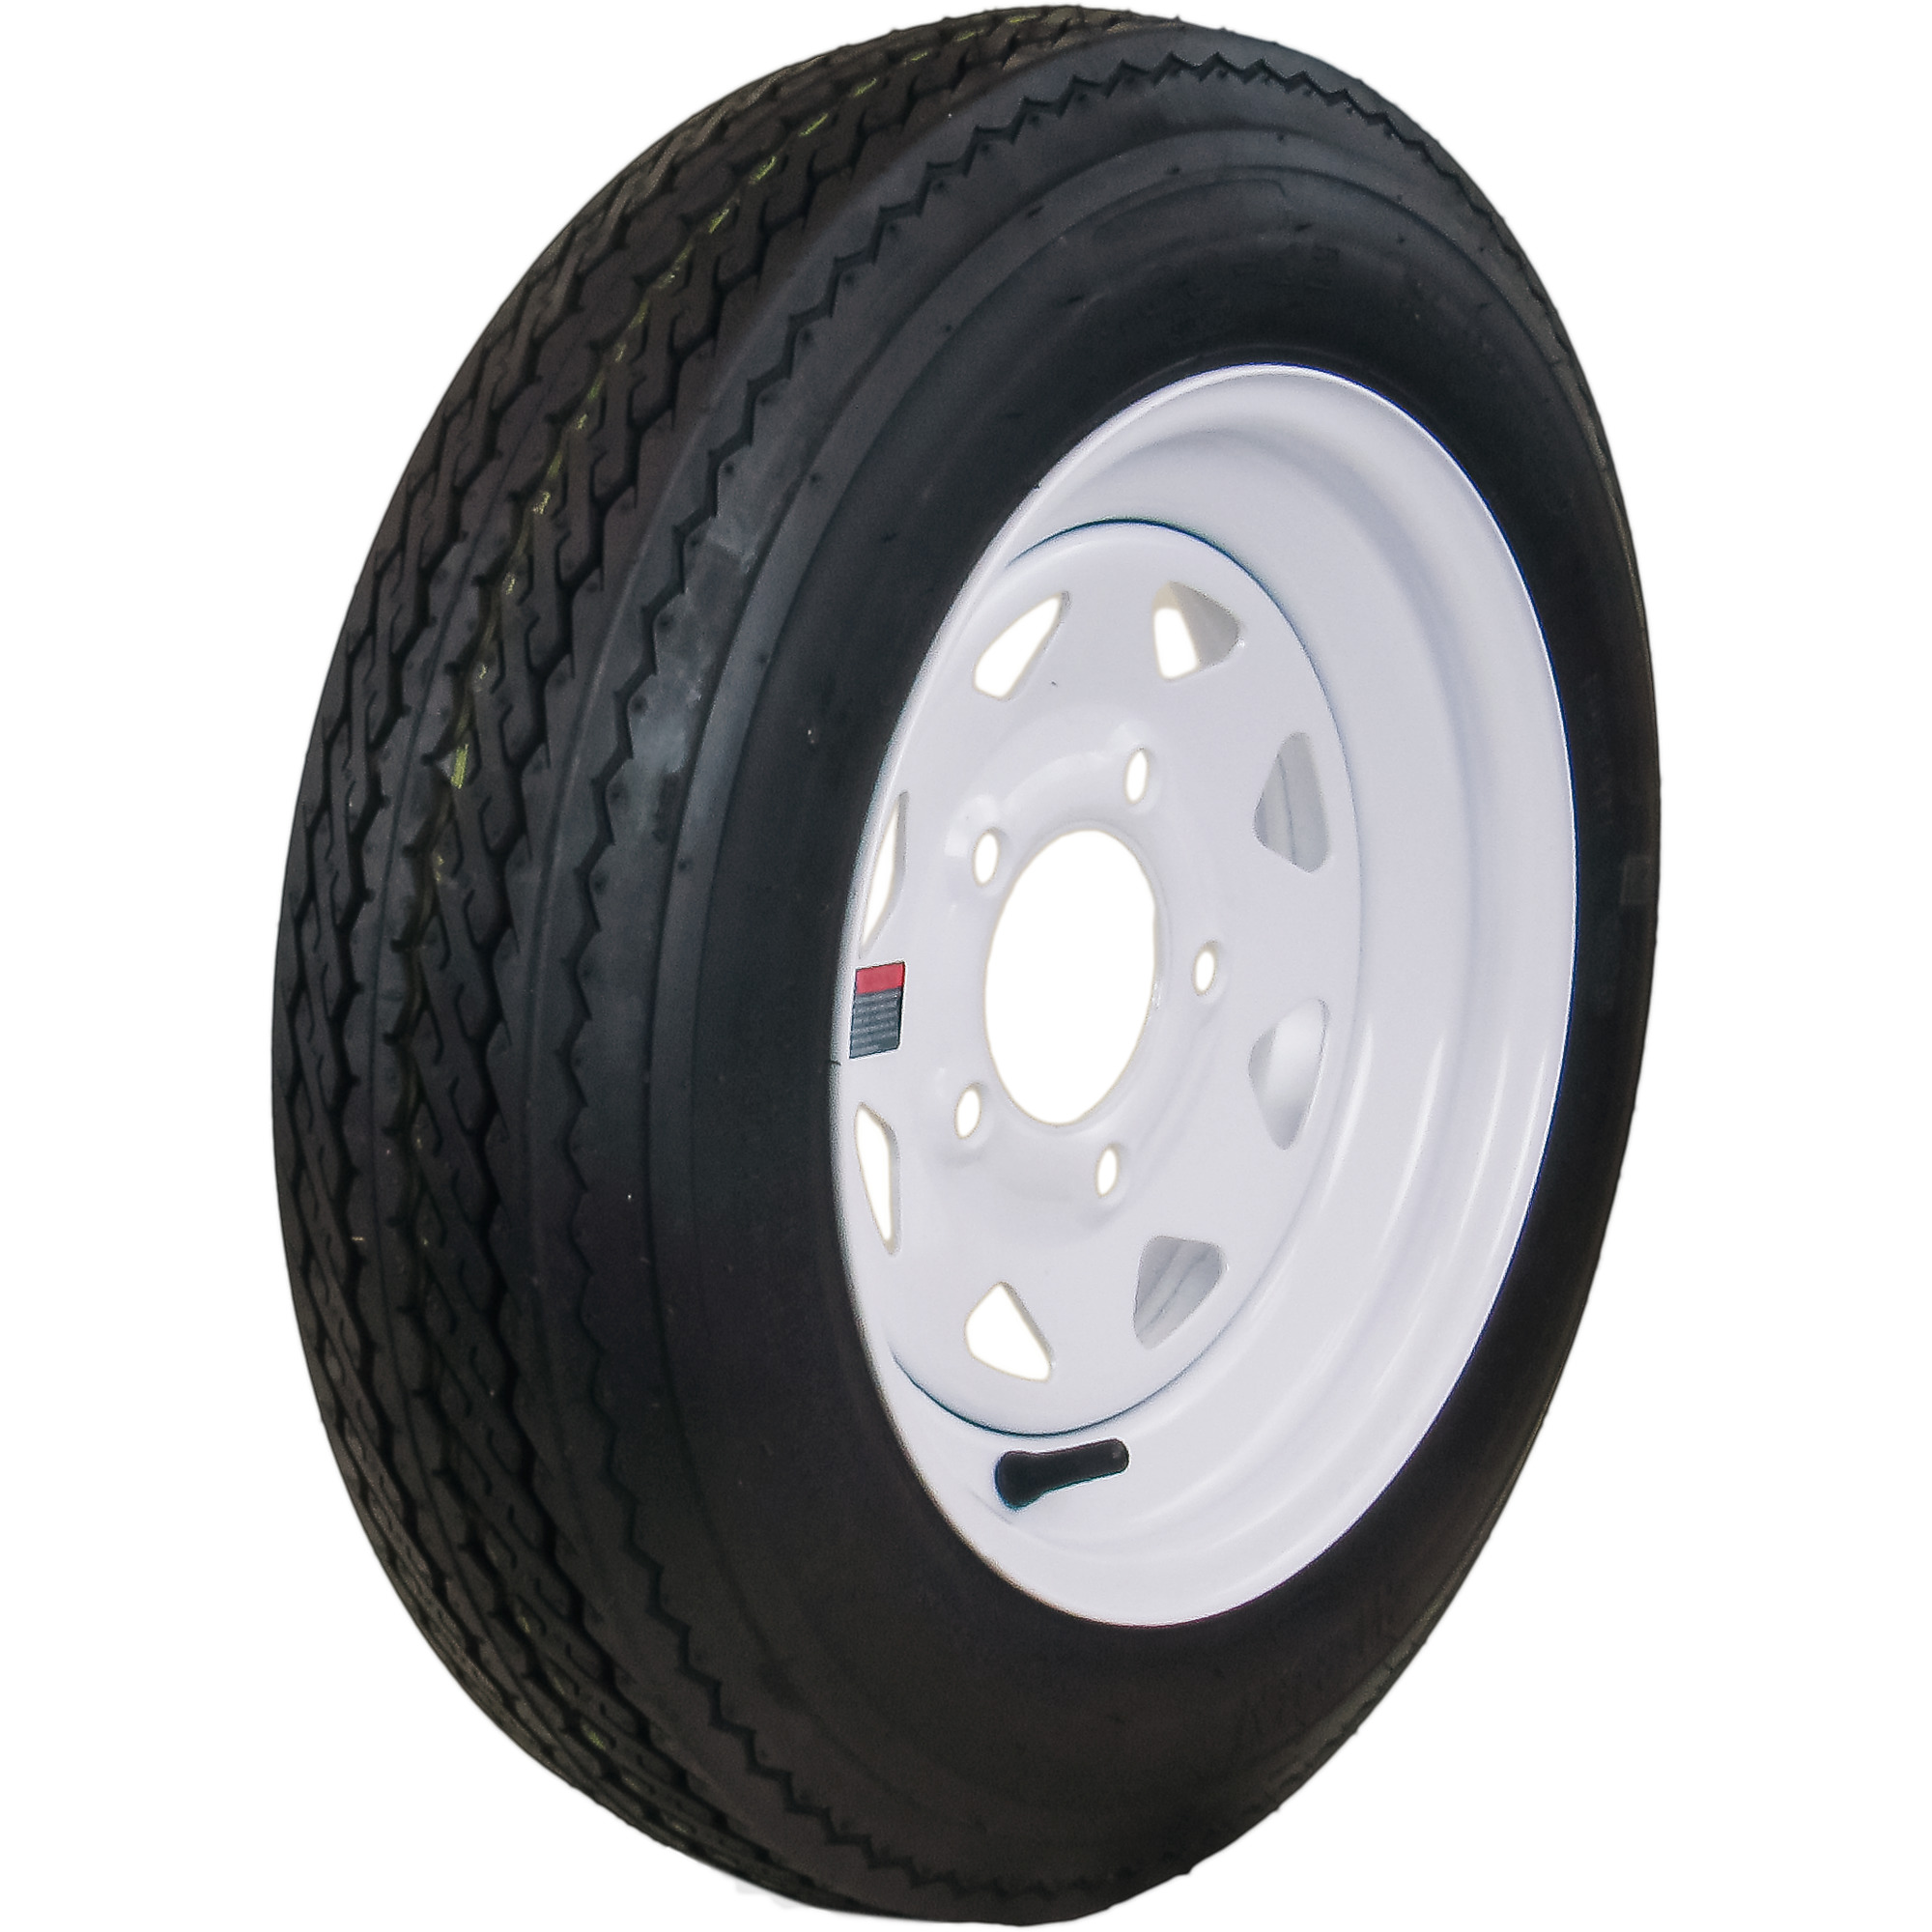 HI-RUN, Highway Trailer Tire Assembly, Bias-Ply, Tire Size 4.80X12 Load Range Rating C, Bolt Holes (qty.) 5 Model ASB1098